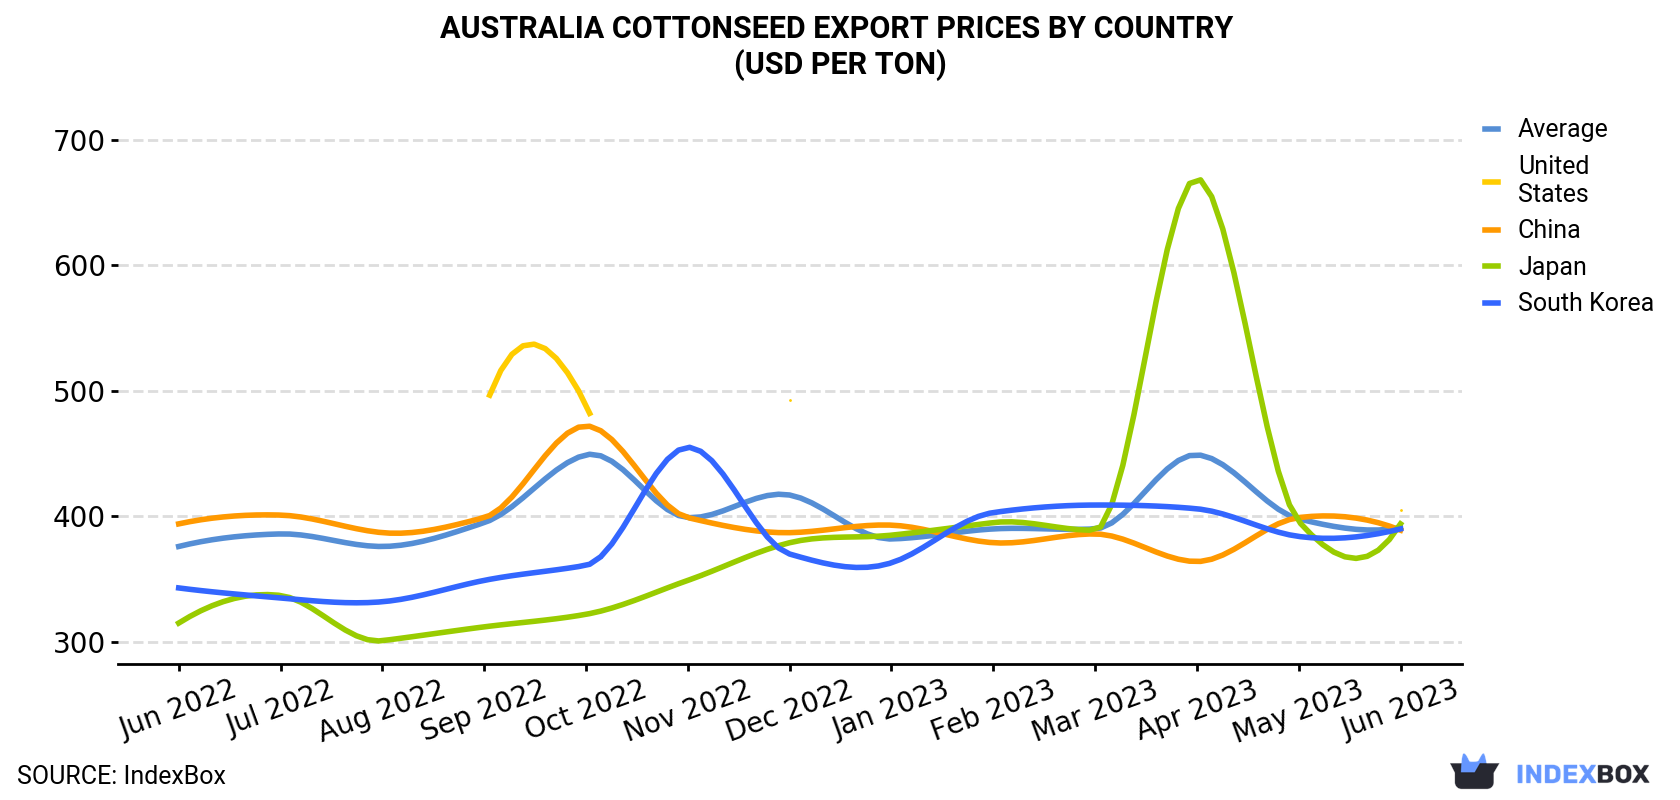 Australia Cottonseed Export Prices By Country (USD Per Ton)